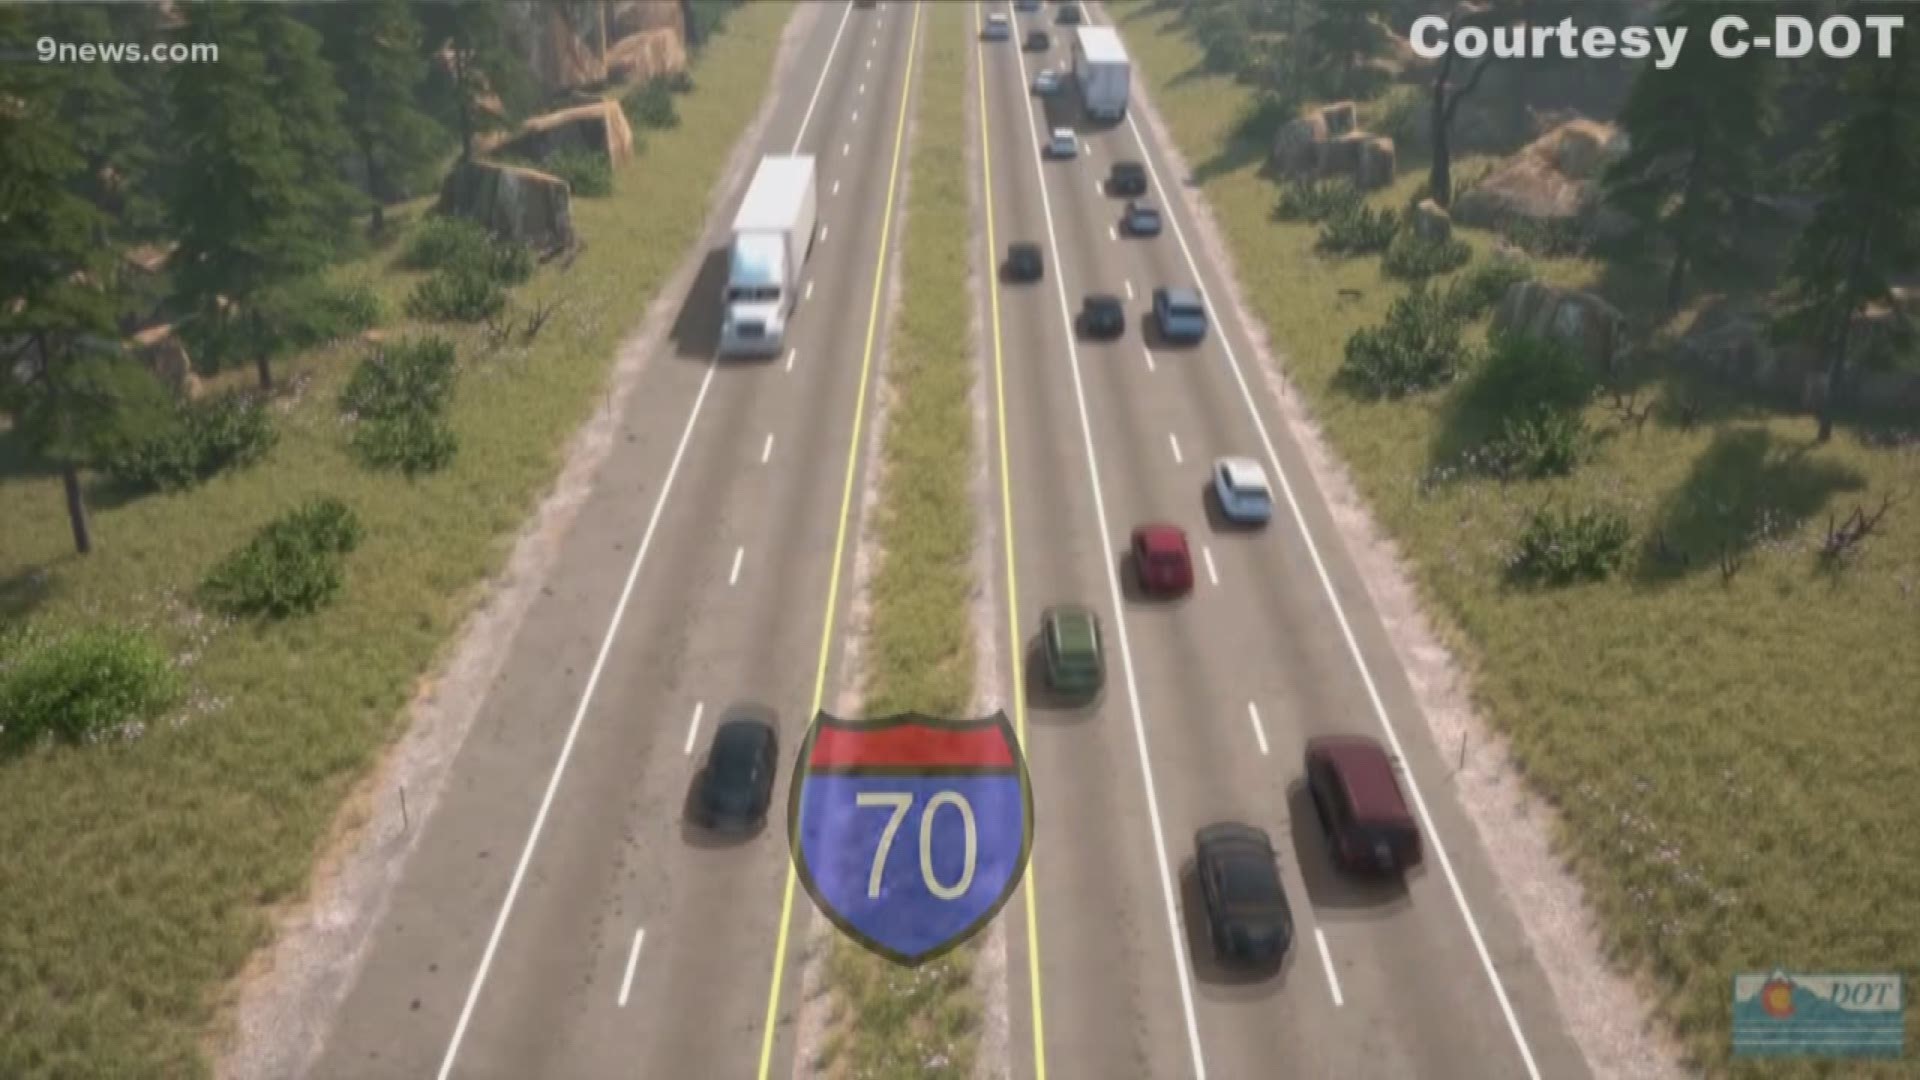 Work begins Monday on a new express lane on the westbound side of I-70 near Idaho Springs. As part of the $70 million project, the shoulder will be converted to a travel lane.